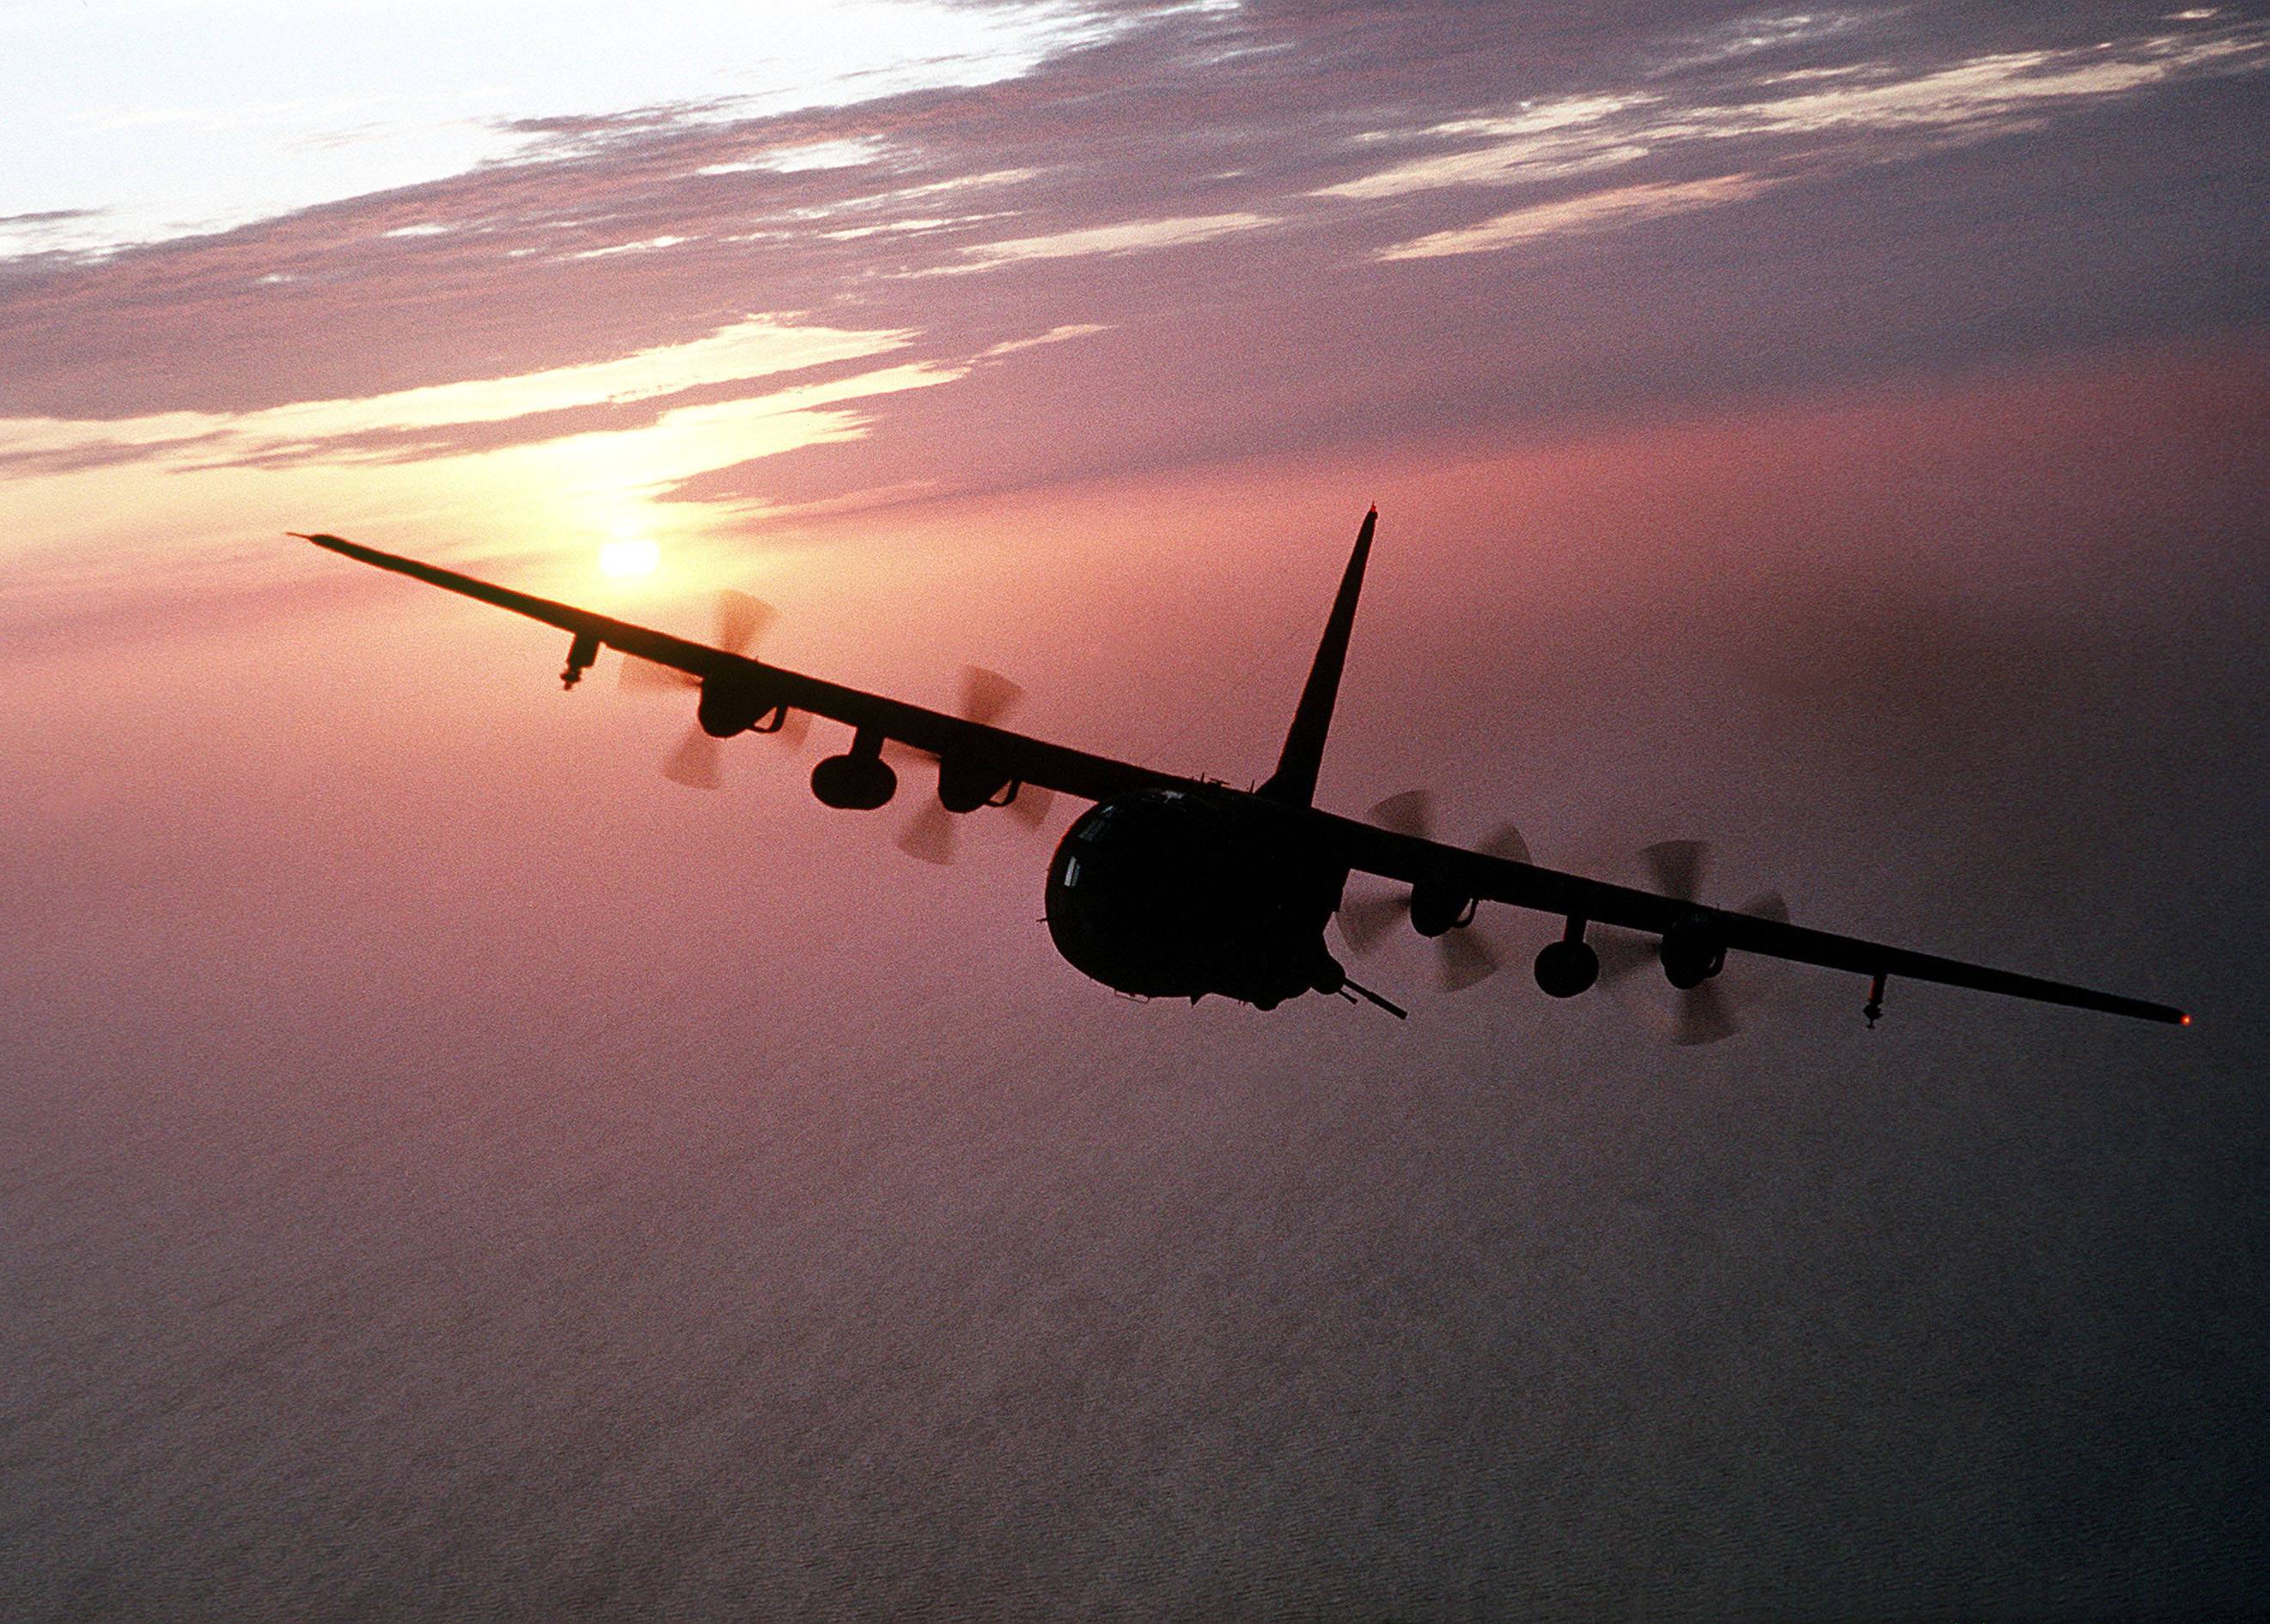 image For > Ac 130 Wallpaper